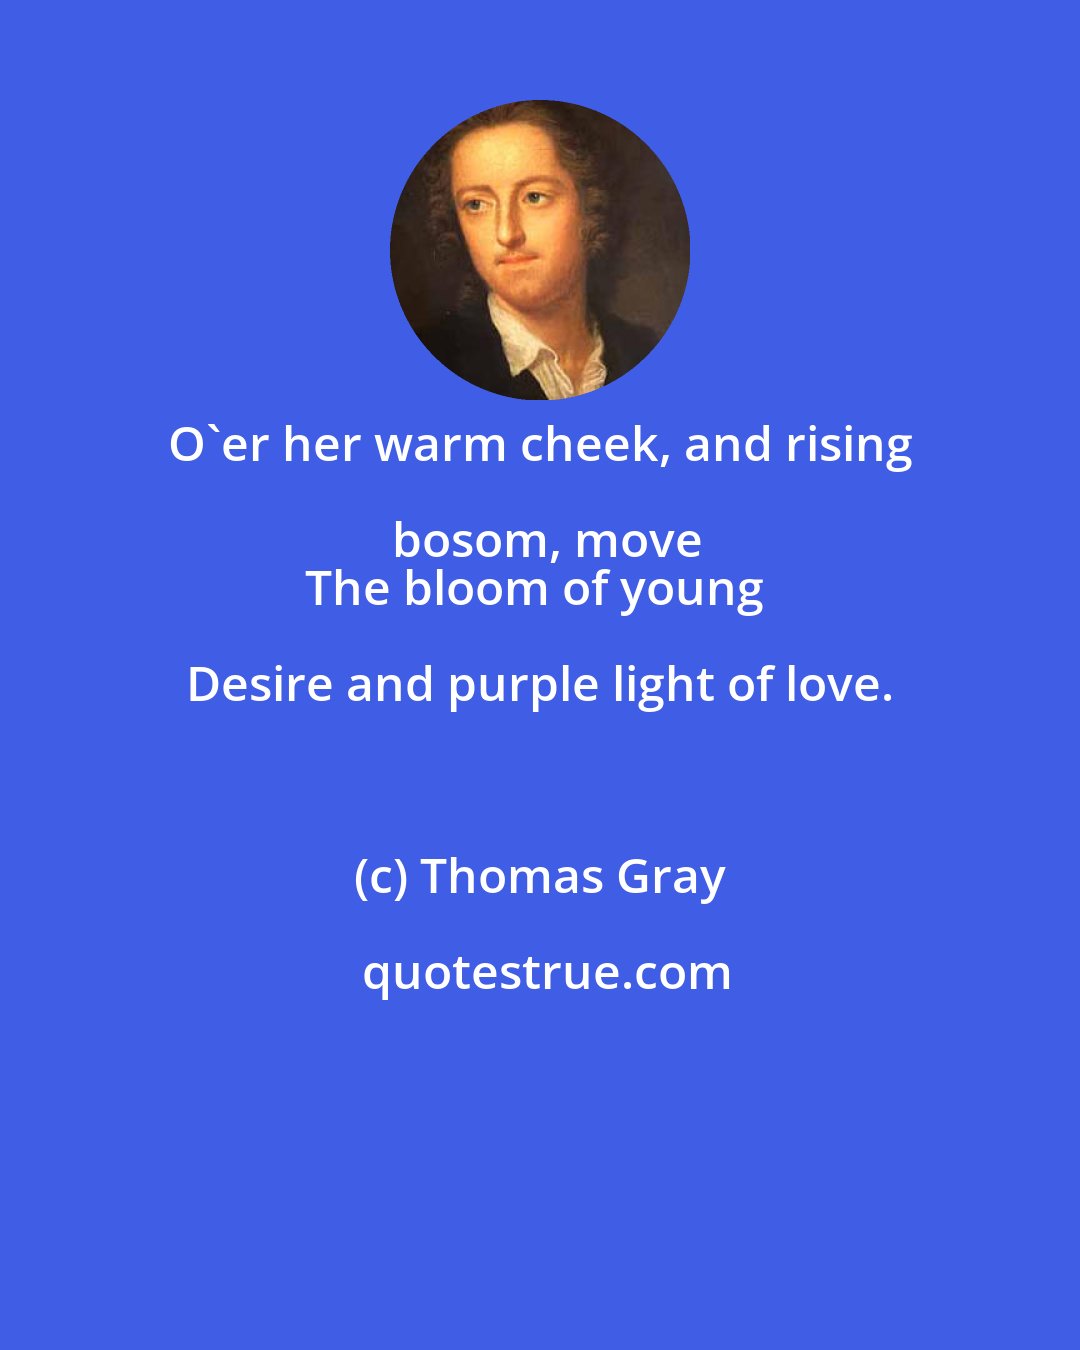 Thomas Gray: O'er her warm cheek, and rising bosom, move
The bloom of young Desire and purple light of love.